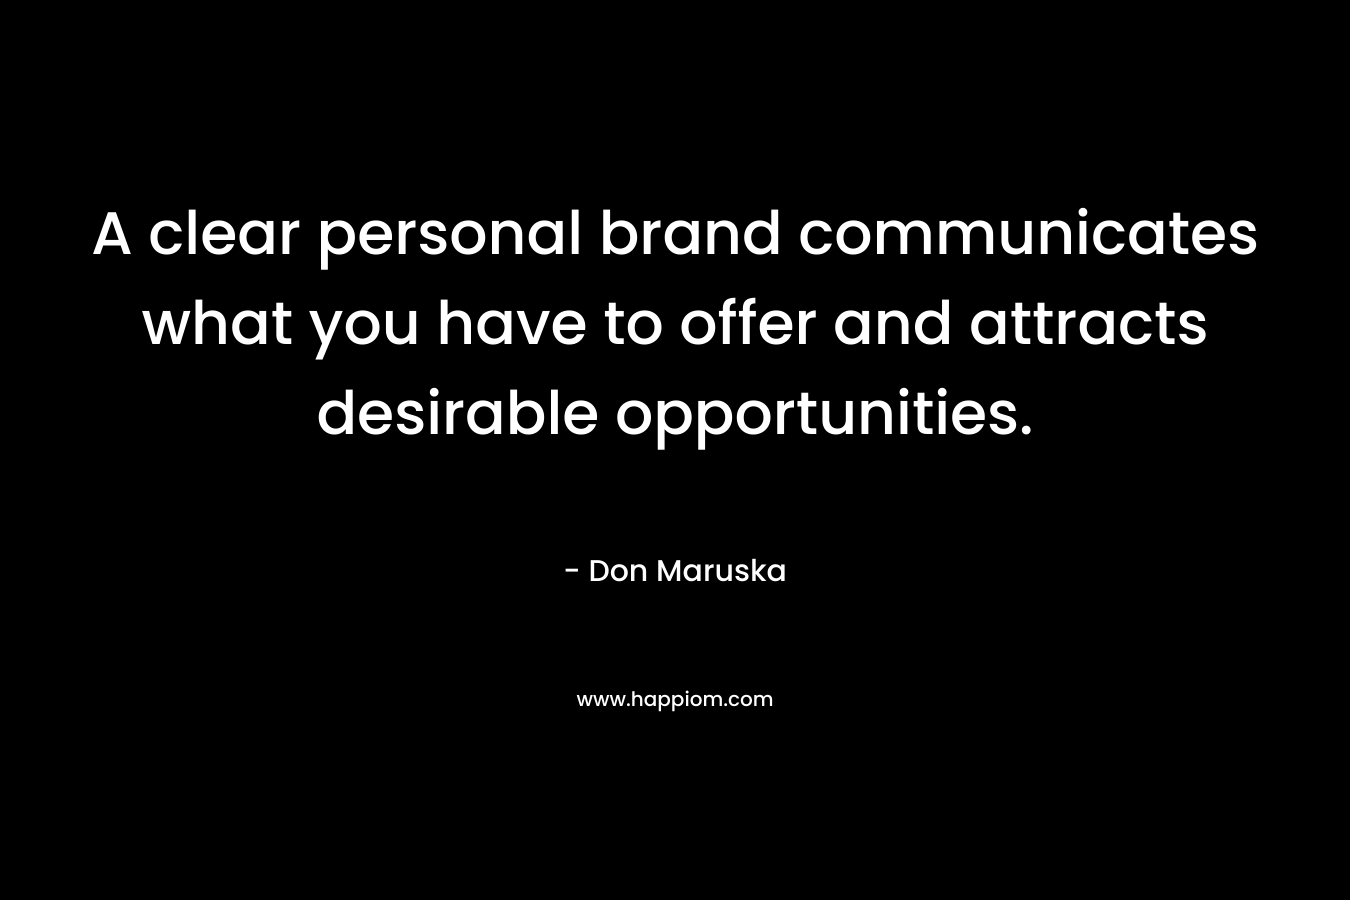 A clear personal brand communicates what you have to offer and attracts desirable opportunities.